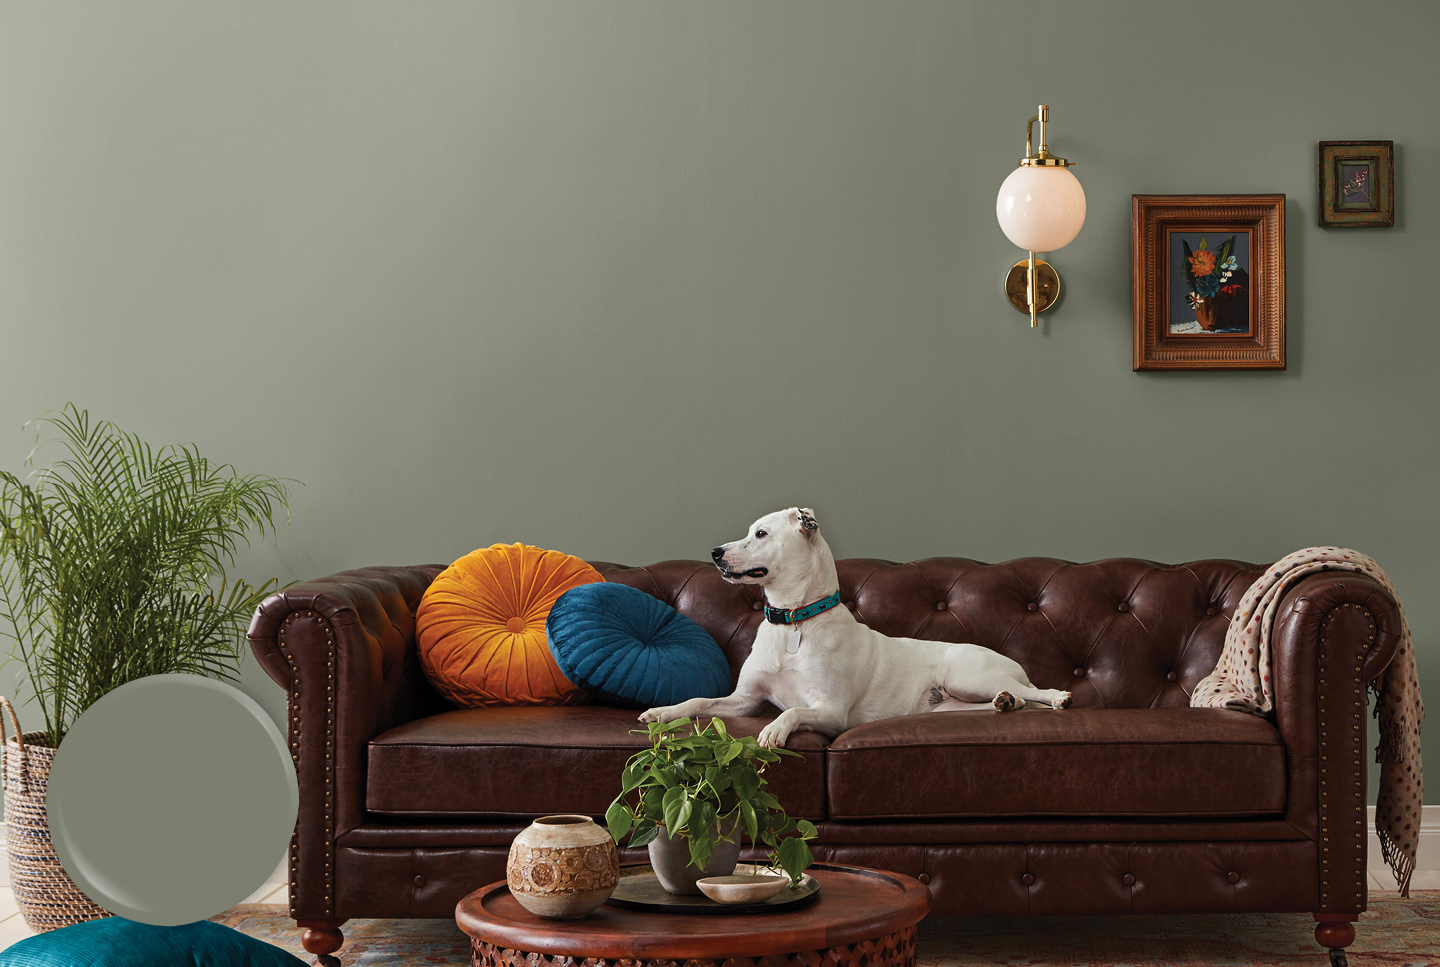 Large white dog laying on leather couch against a Warm Eucalyptus wall. Round pillows on sofa.